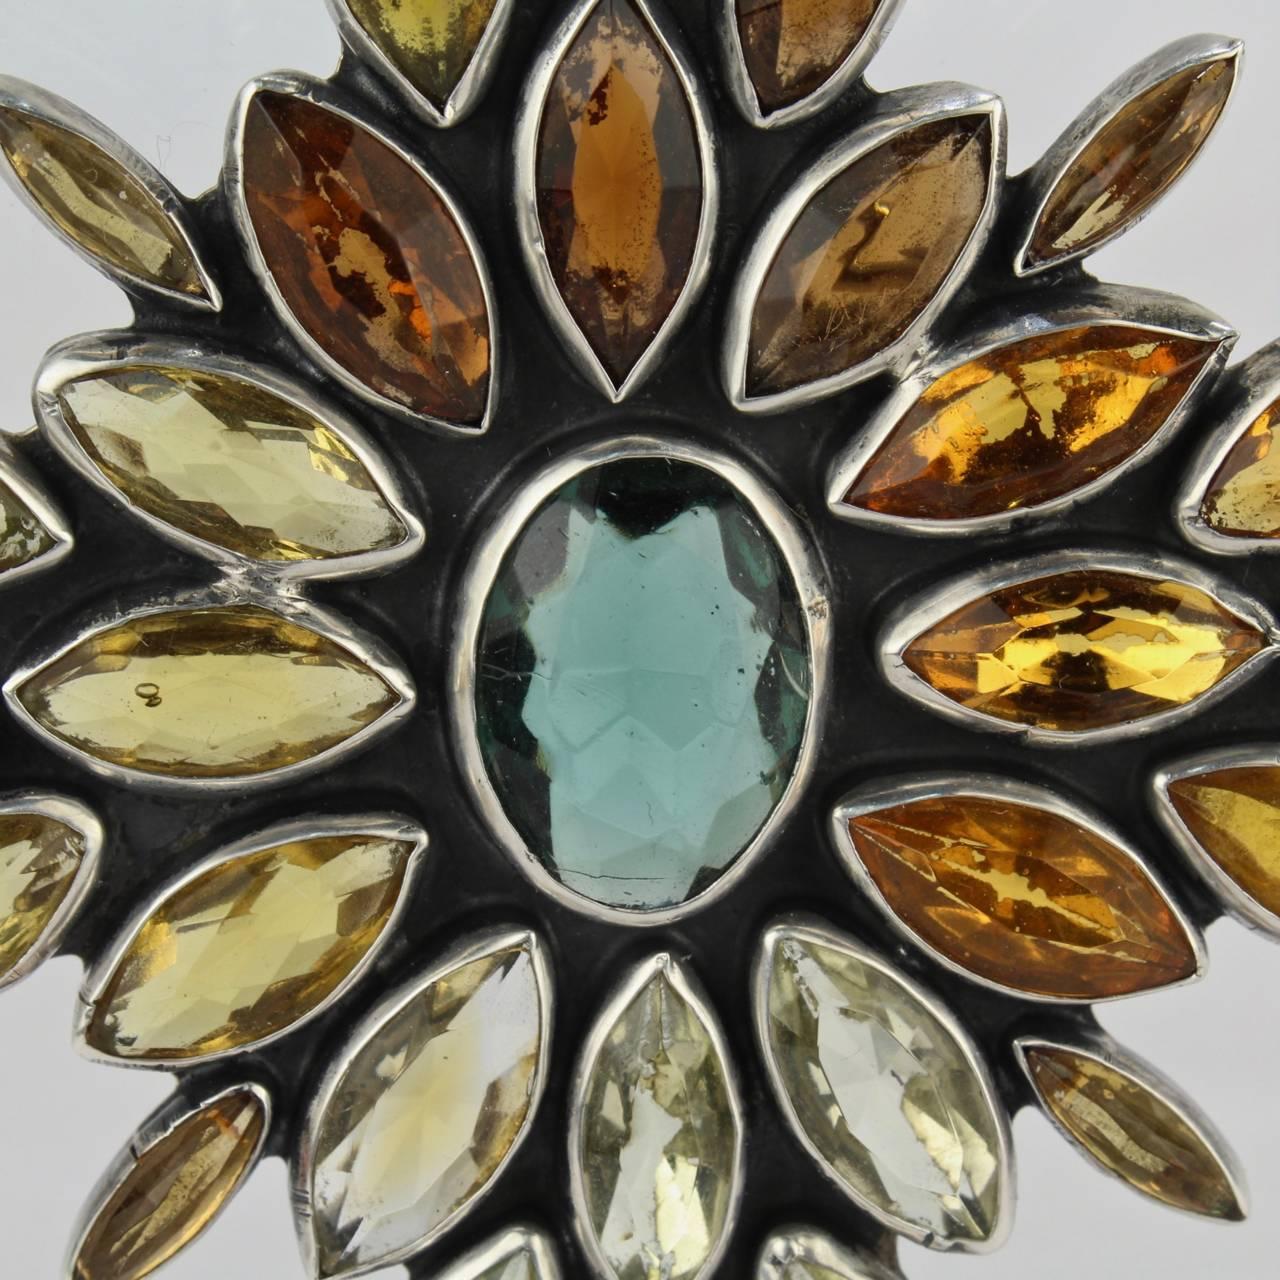 A fine vintage Federico Jimenez sterling silver brooch or pin. 

Of a star shape with a central aquamarine gemstone and an array of surrounding citrine gemstones. There are traces of foil backs to some of the gems (noticeable on the reverse).

The